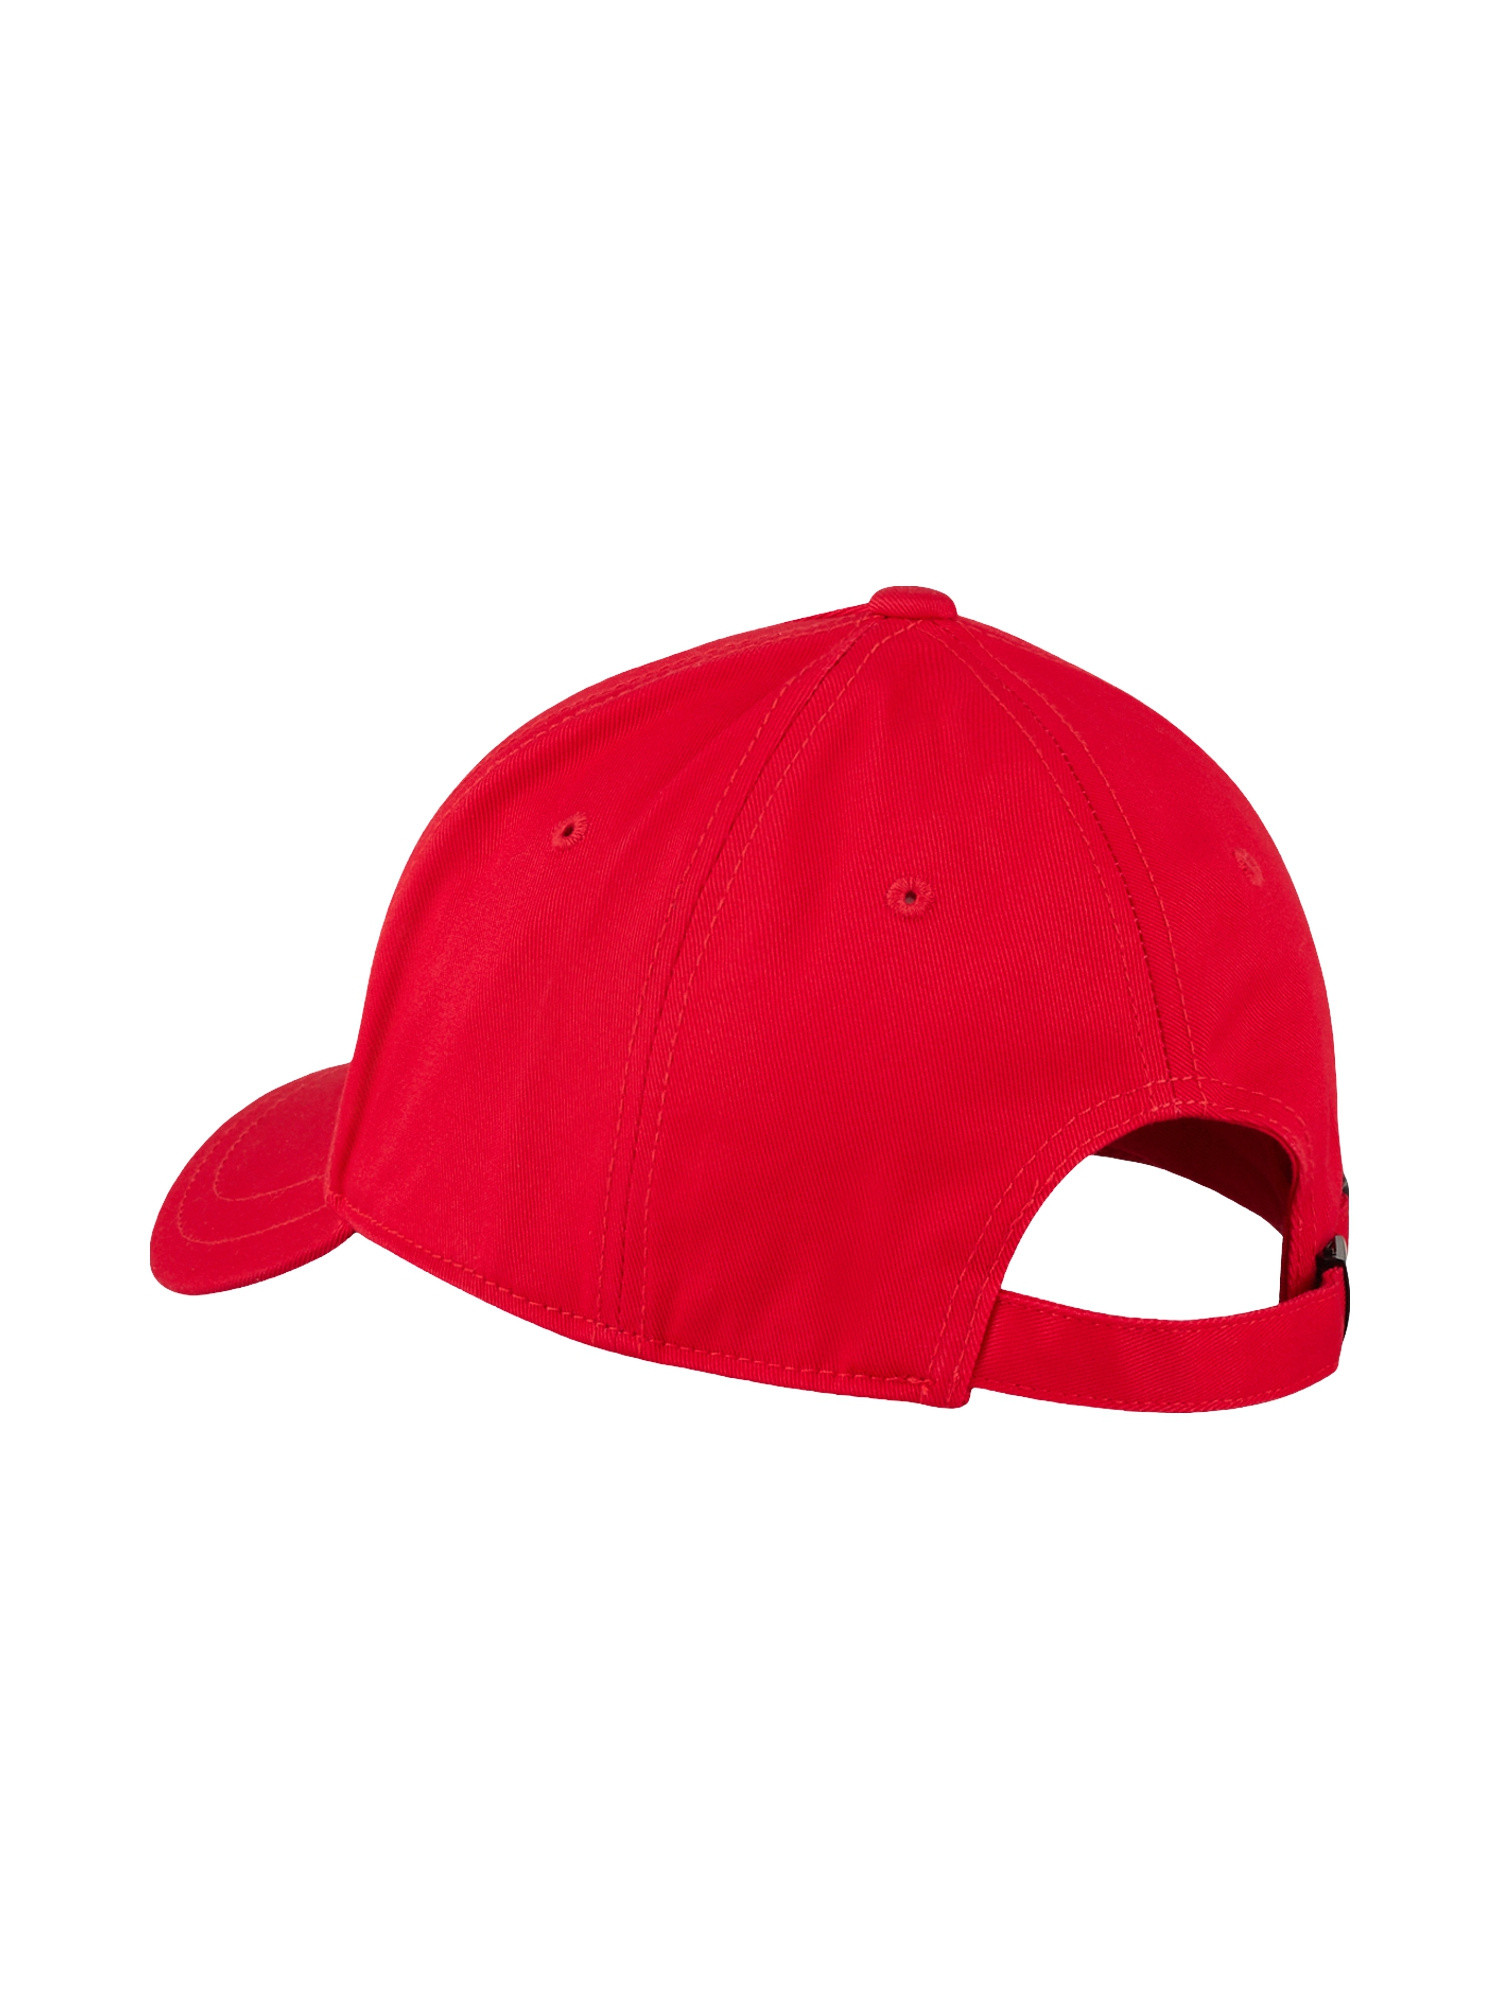 Armani Exchange - Cappello Baseball in cotone con stampa, Rosso, large image number 1